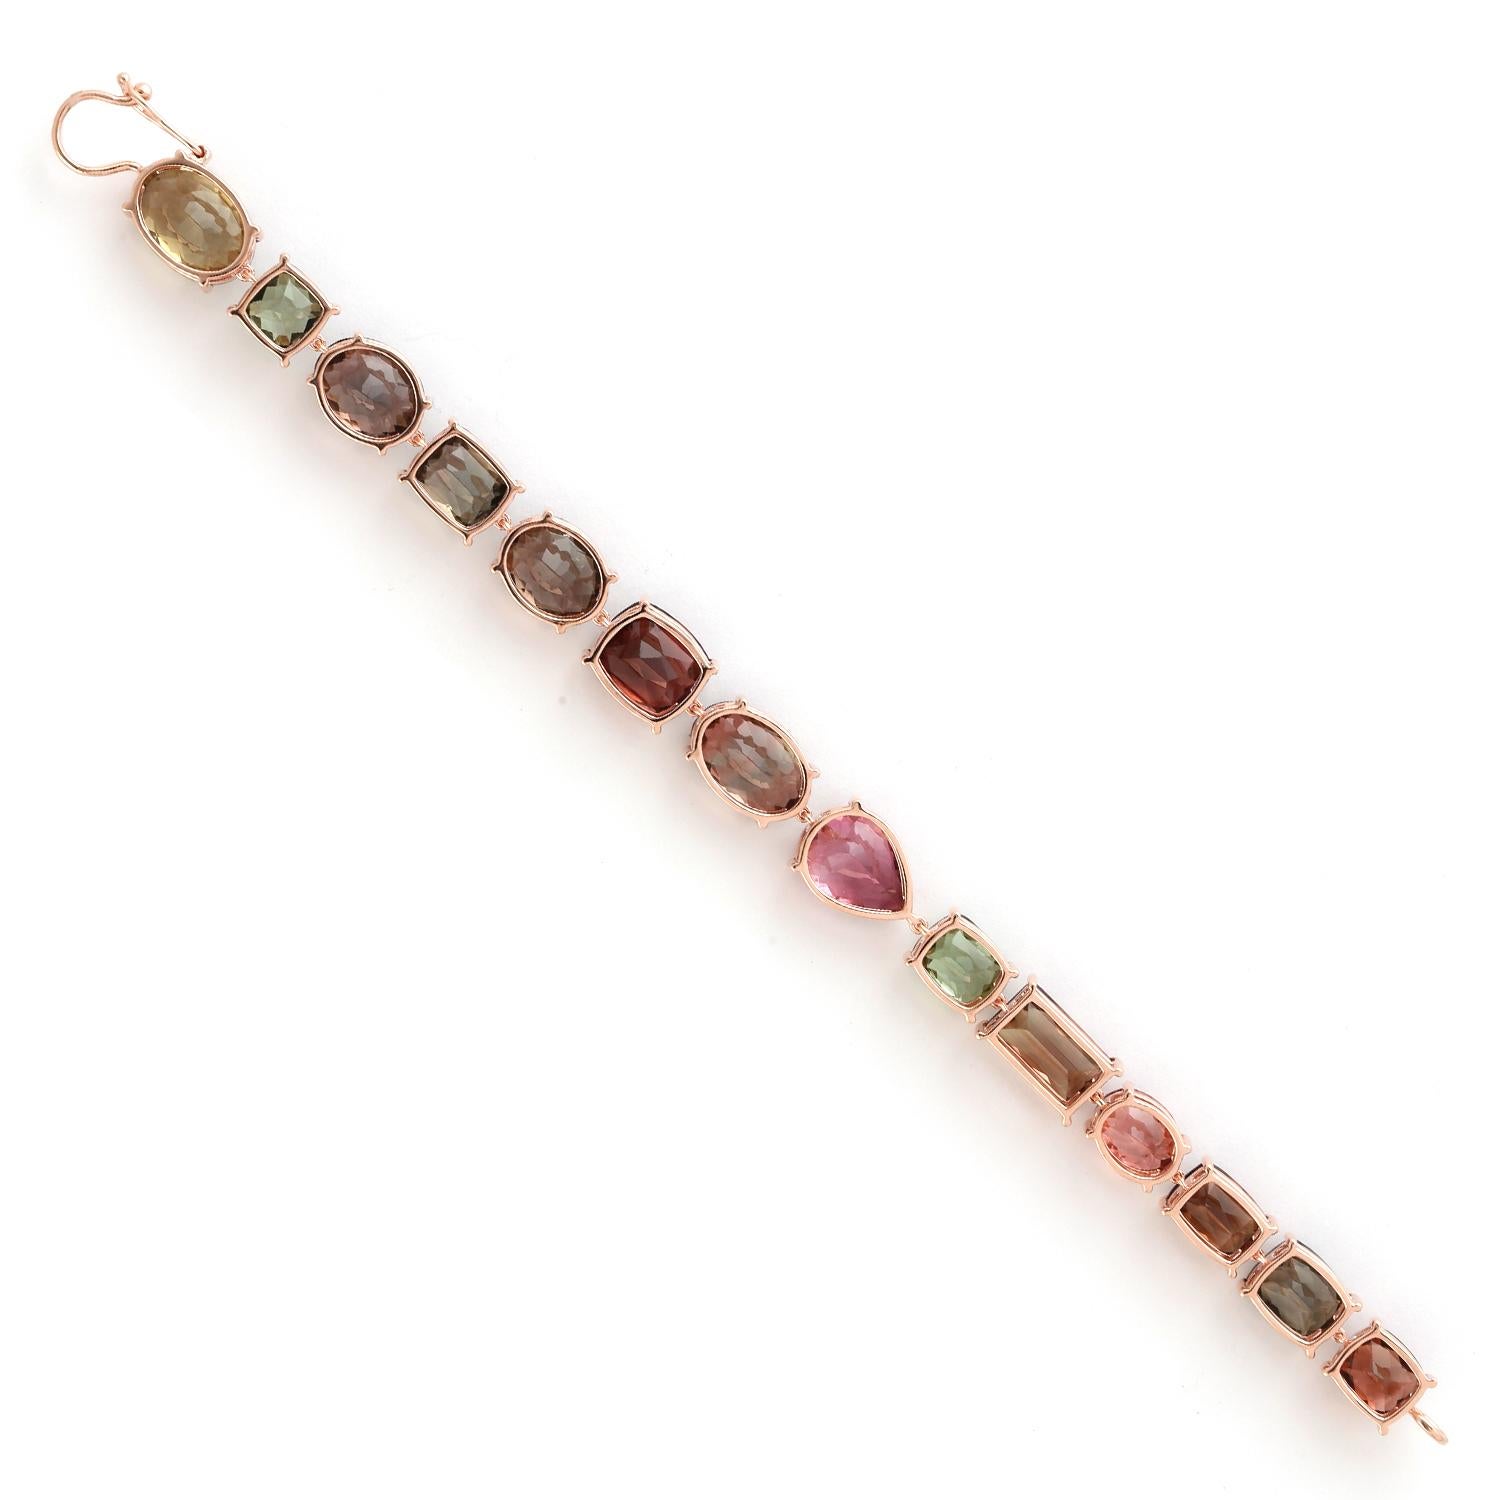 Mixed Cut 56.78 ct Multicolor Tourmaline Bracelet Made In 18k Gold For Sale